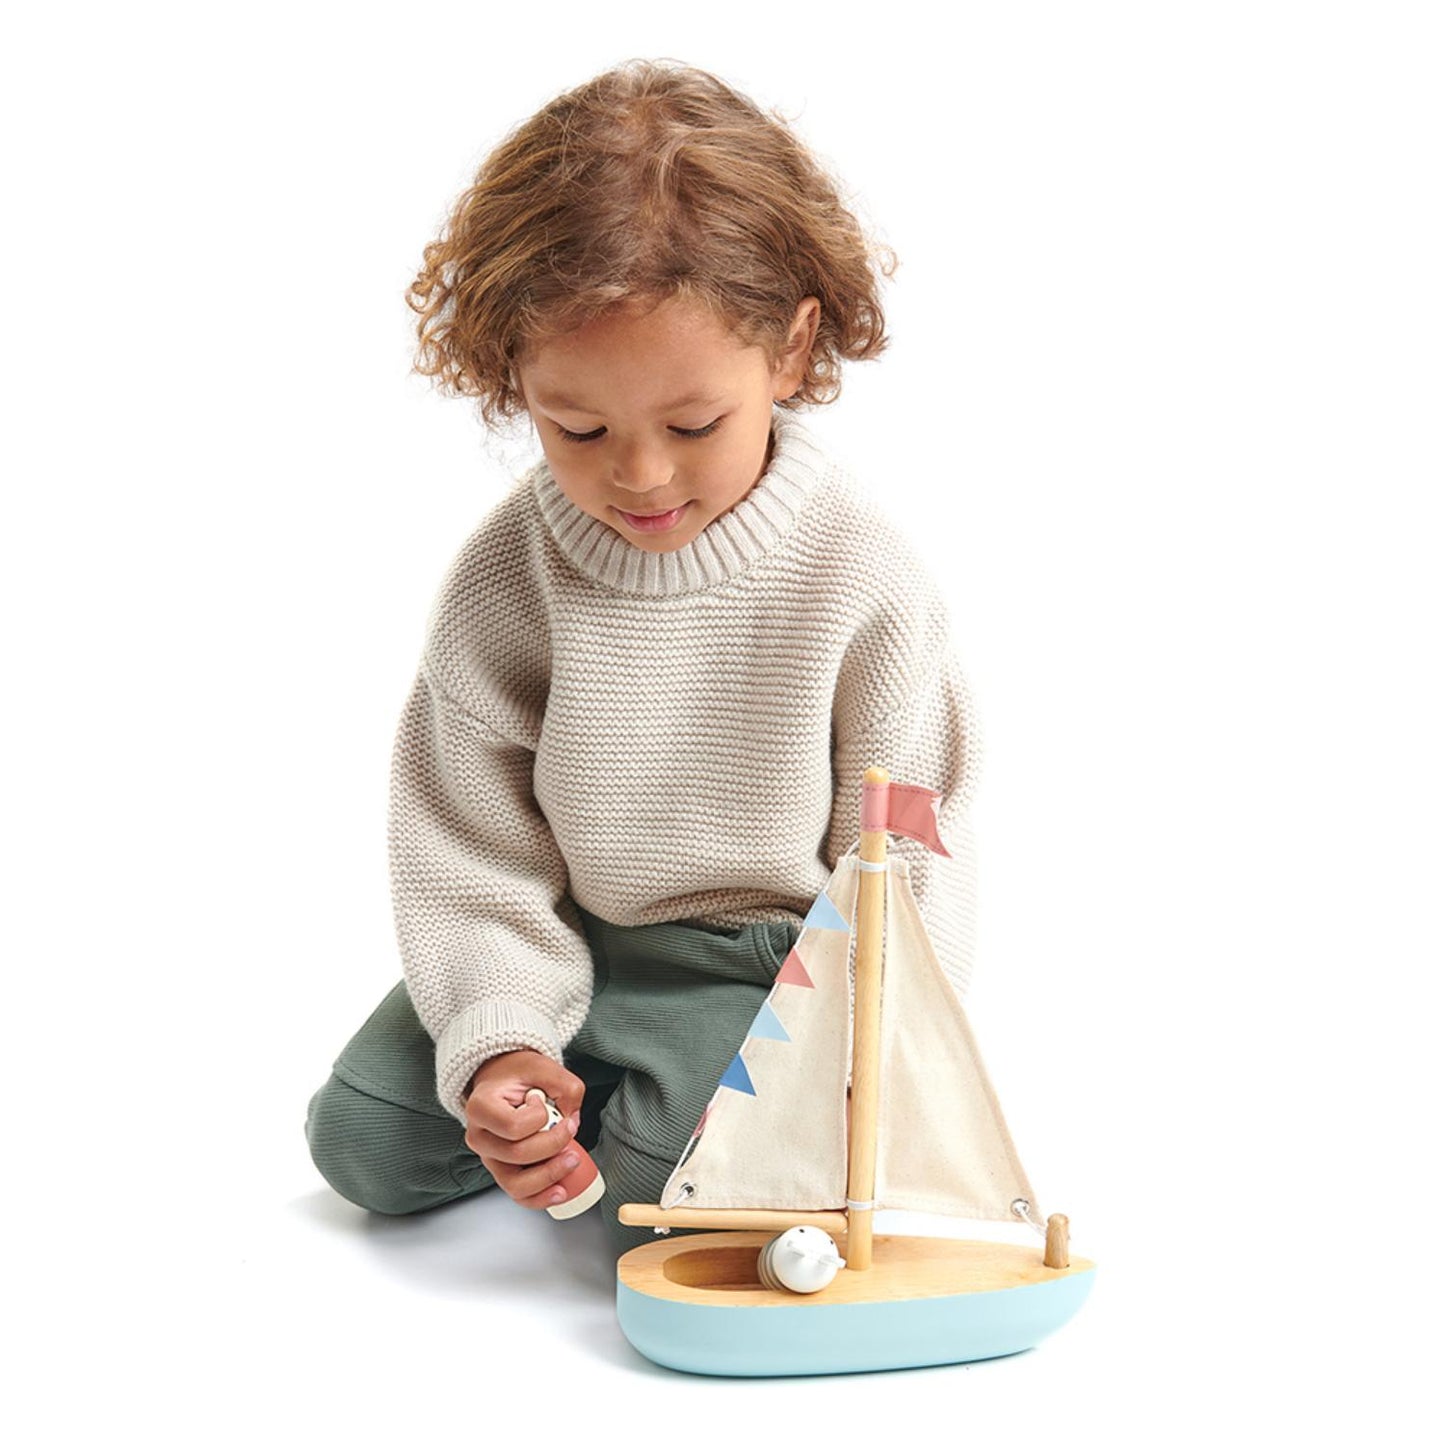 Tender Leaf Toys Sailaway Boat | Wooden Toy Play Set For Kids | Lifestyle – Girl Playing With Boat | BeoVERDE.ie